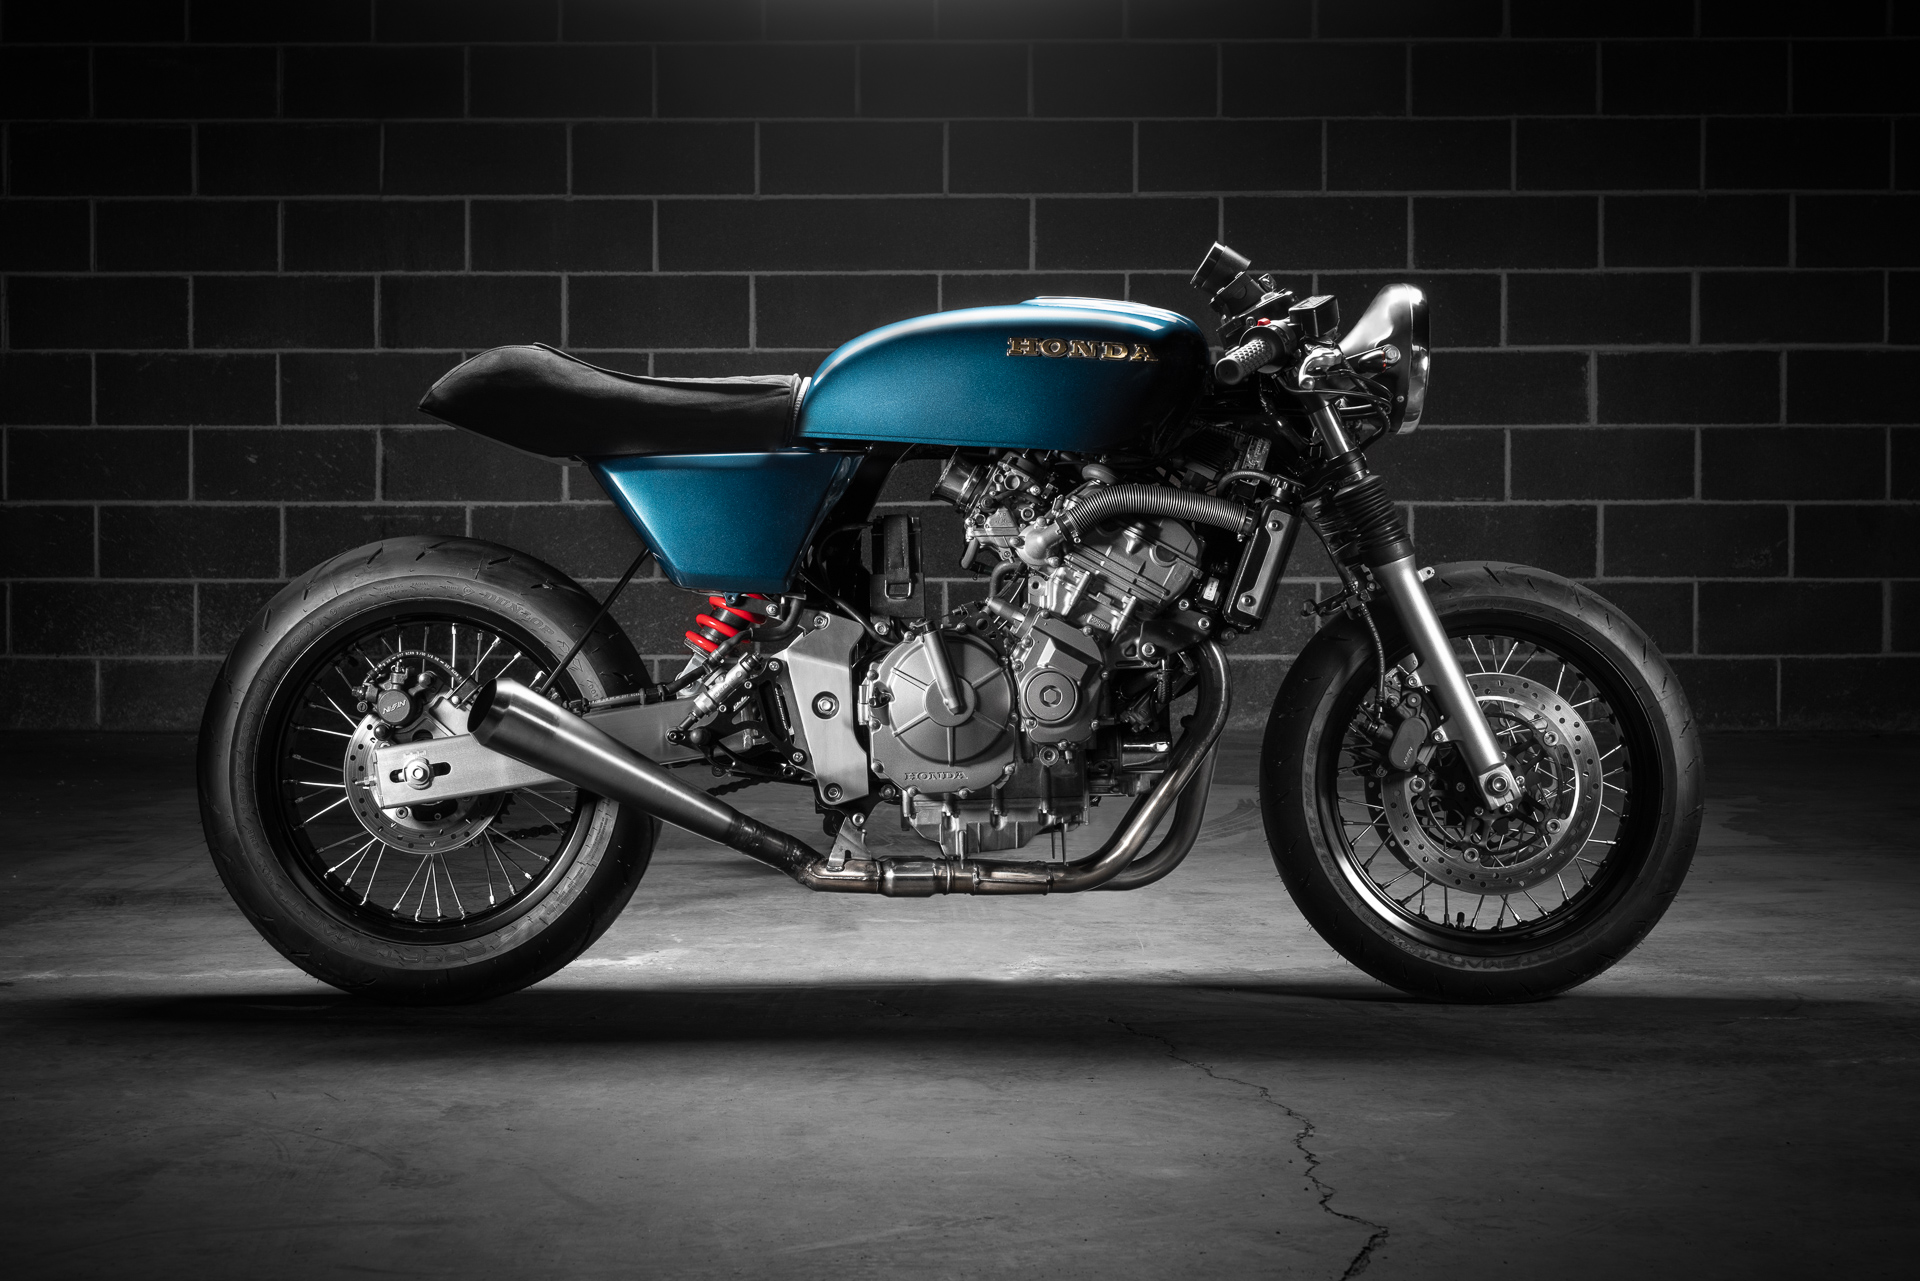 caferacer by luca ricci...